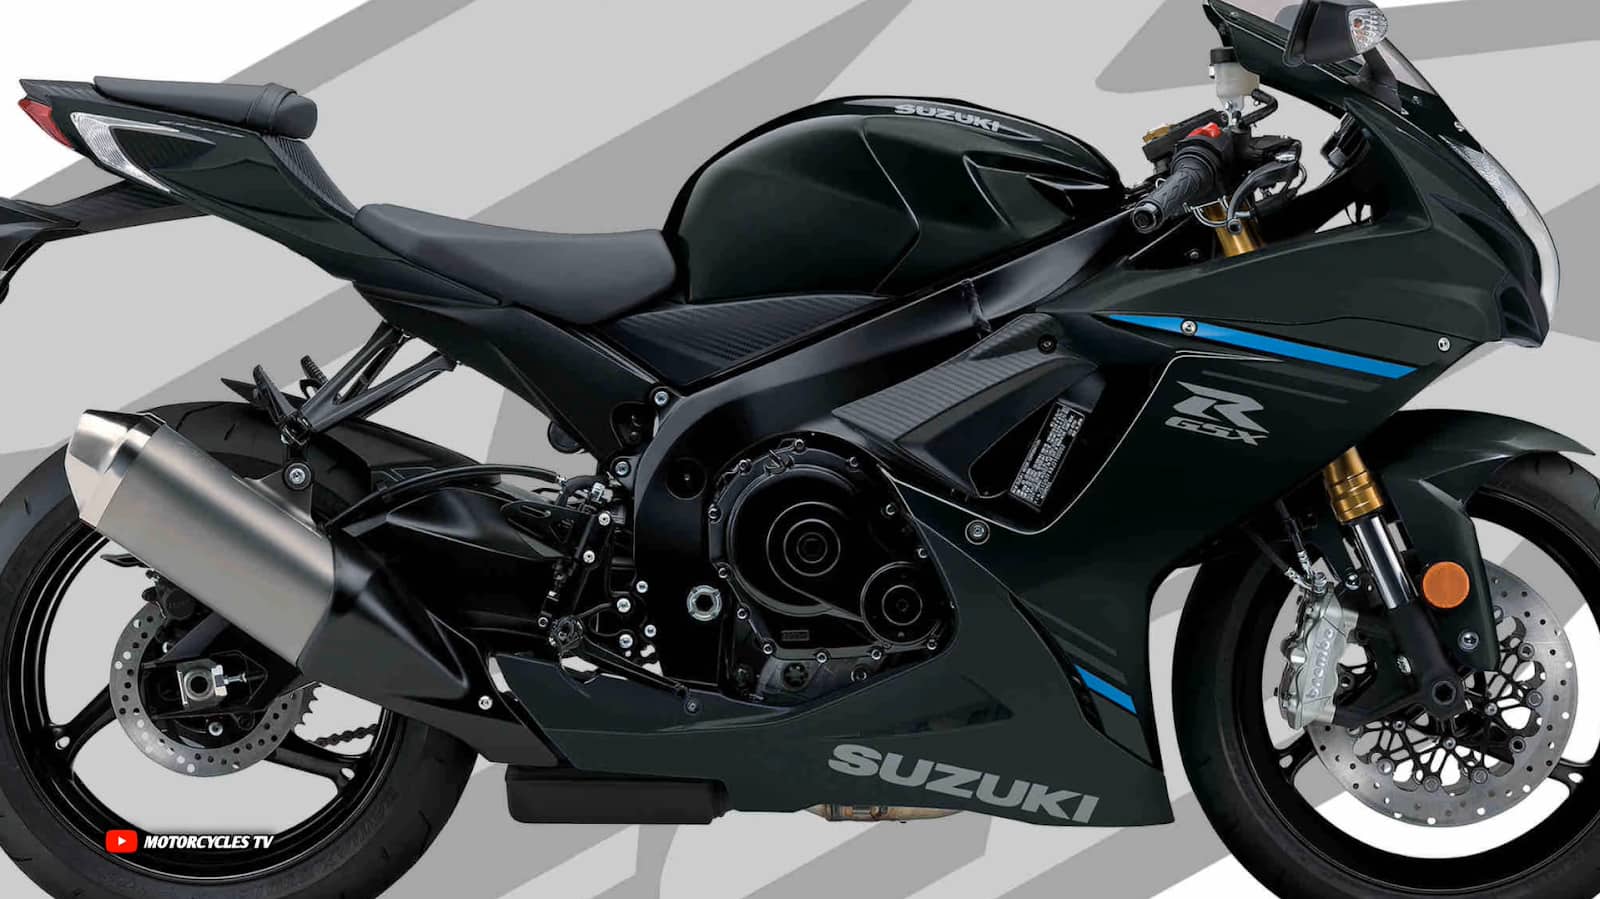 Black Suzuki motorcycle with blue accents and black wheels